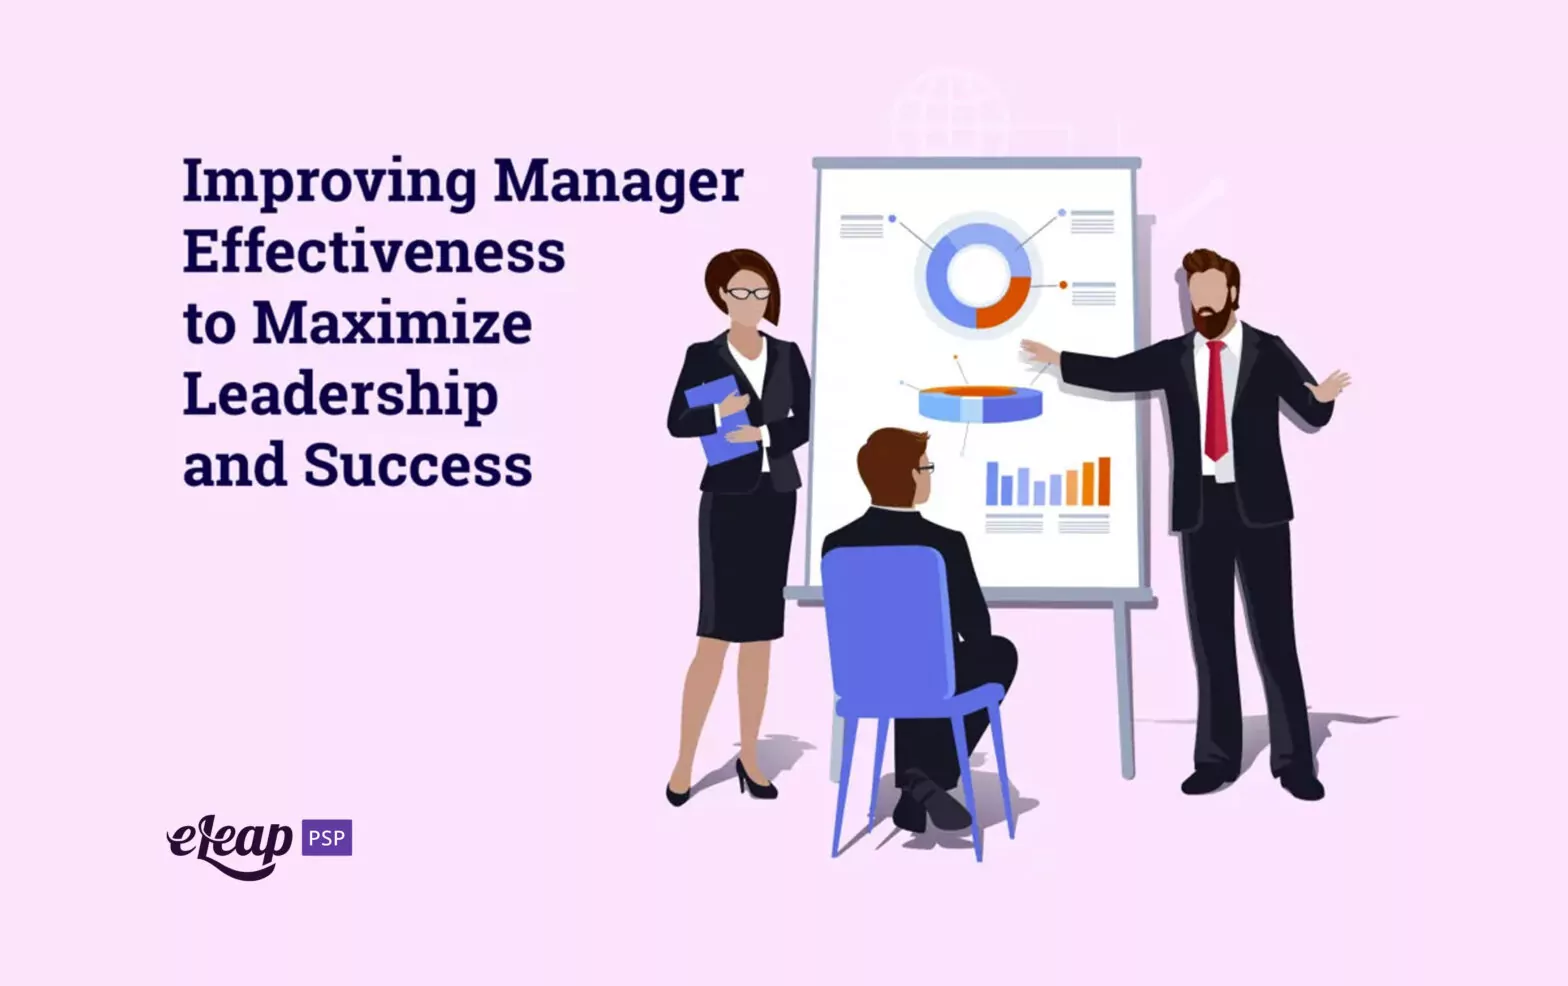 Improving Manager Effectiveness to Maximize Leadership and Success